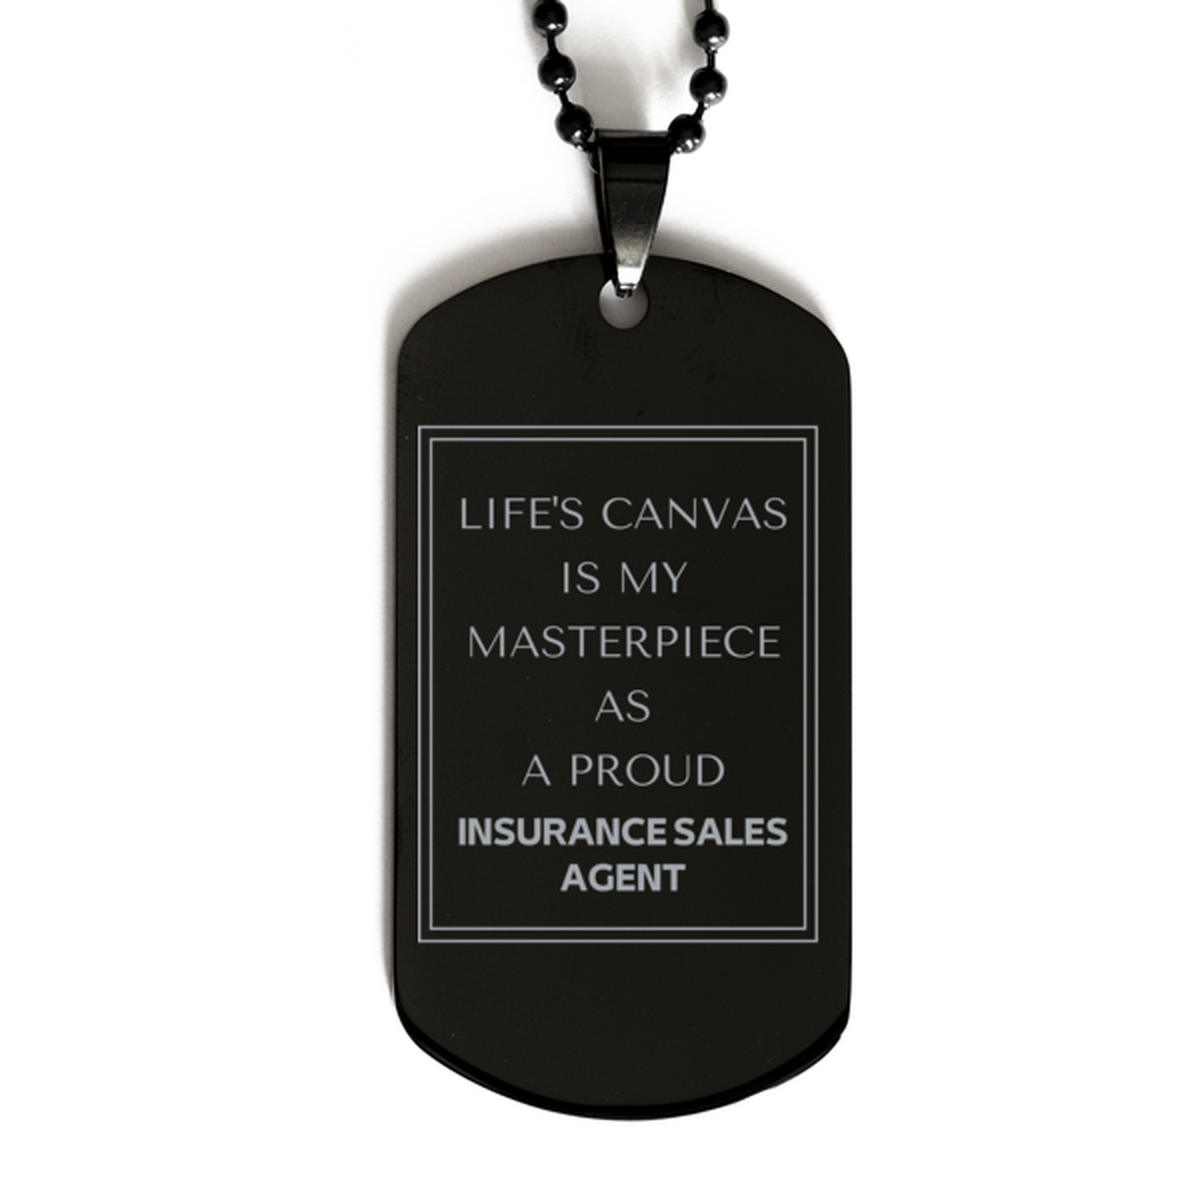 Proud Insurance Sales Agent Gifts, Life's canvas is my masterpiece, Epic Birthday Christmas Unique Black Dog Tag For Insurance Sales Agent, Coworkers, Men, Women, Friends